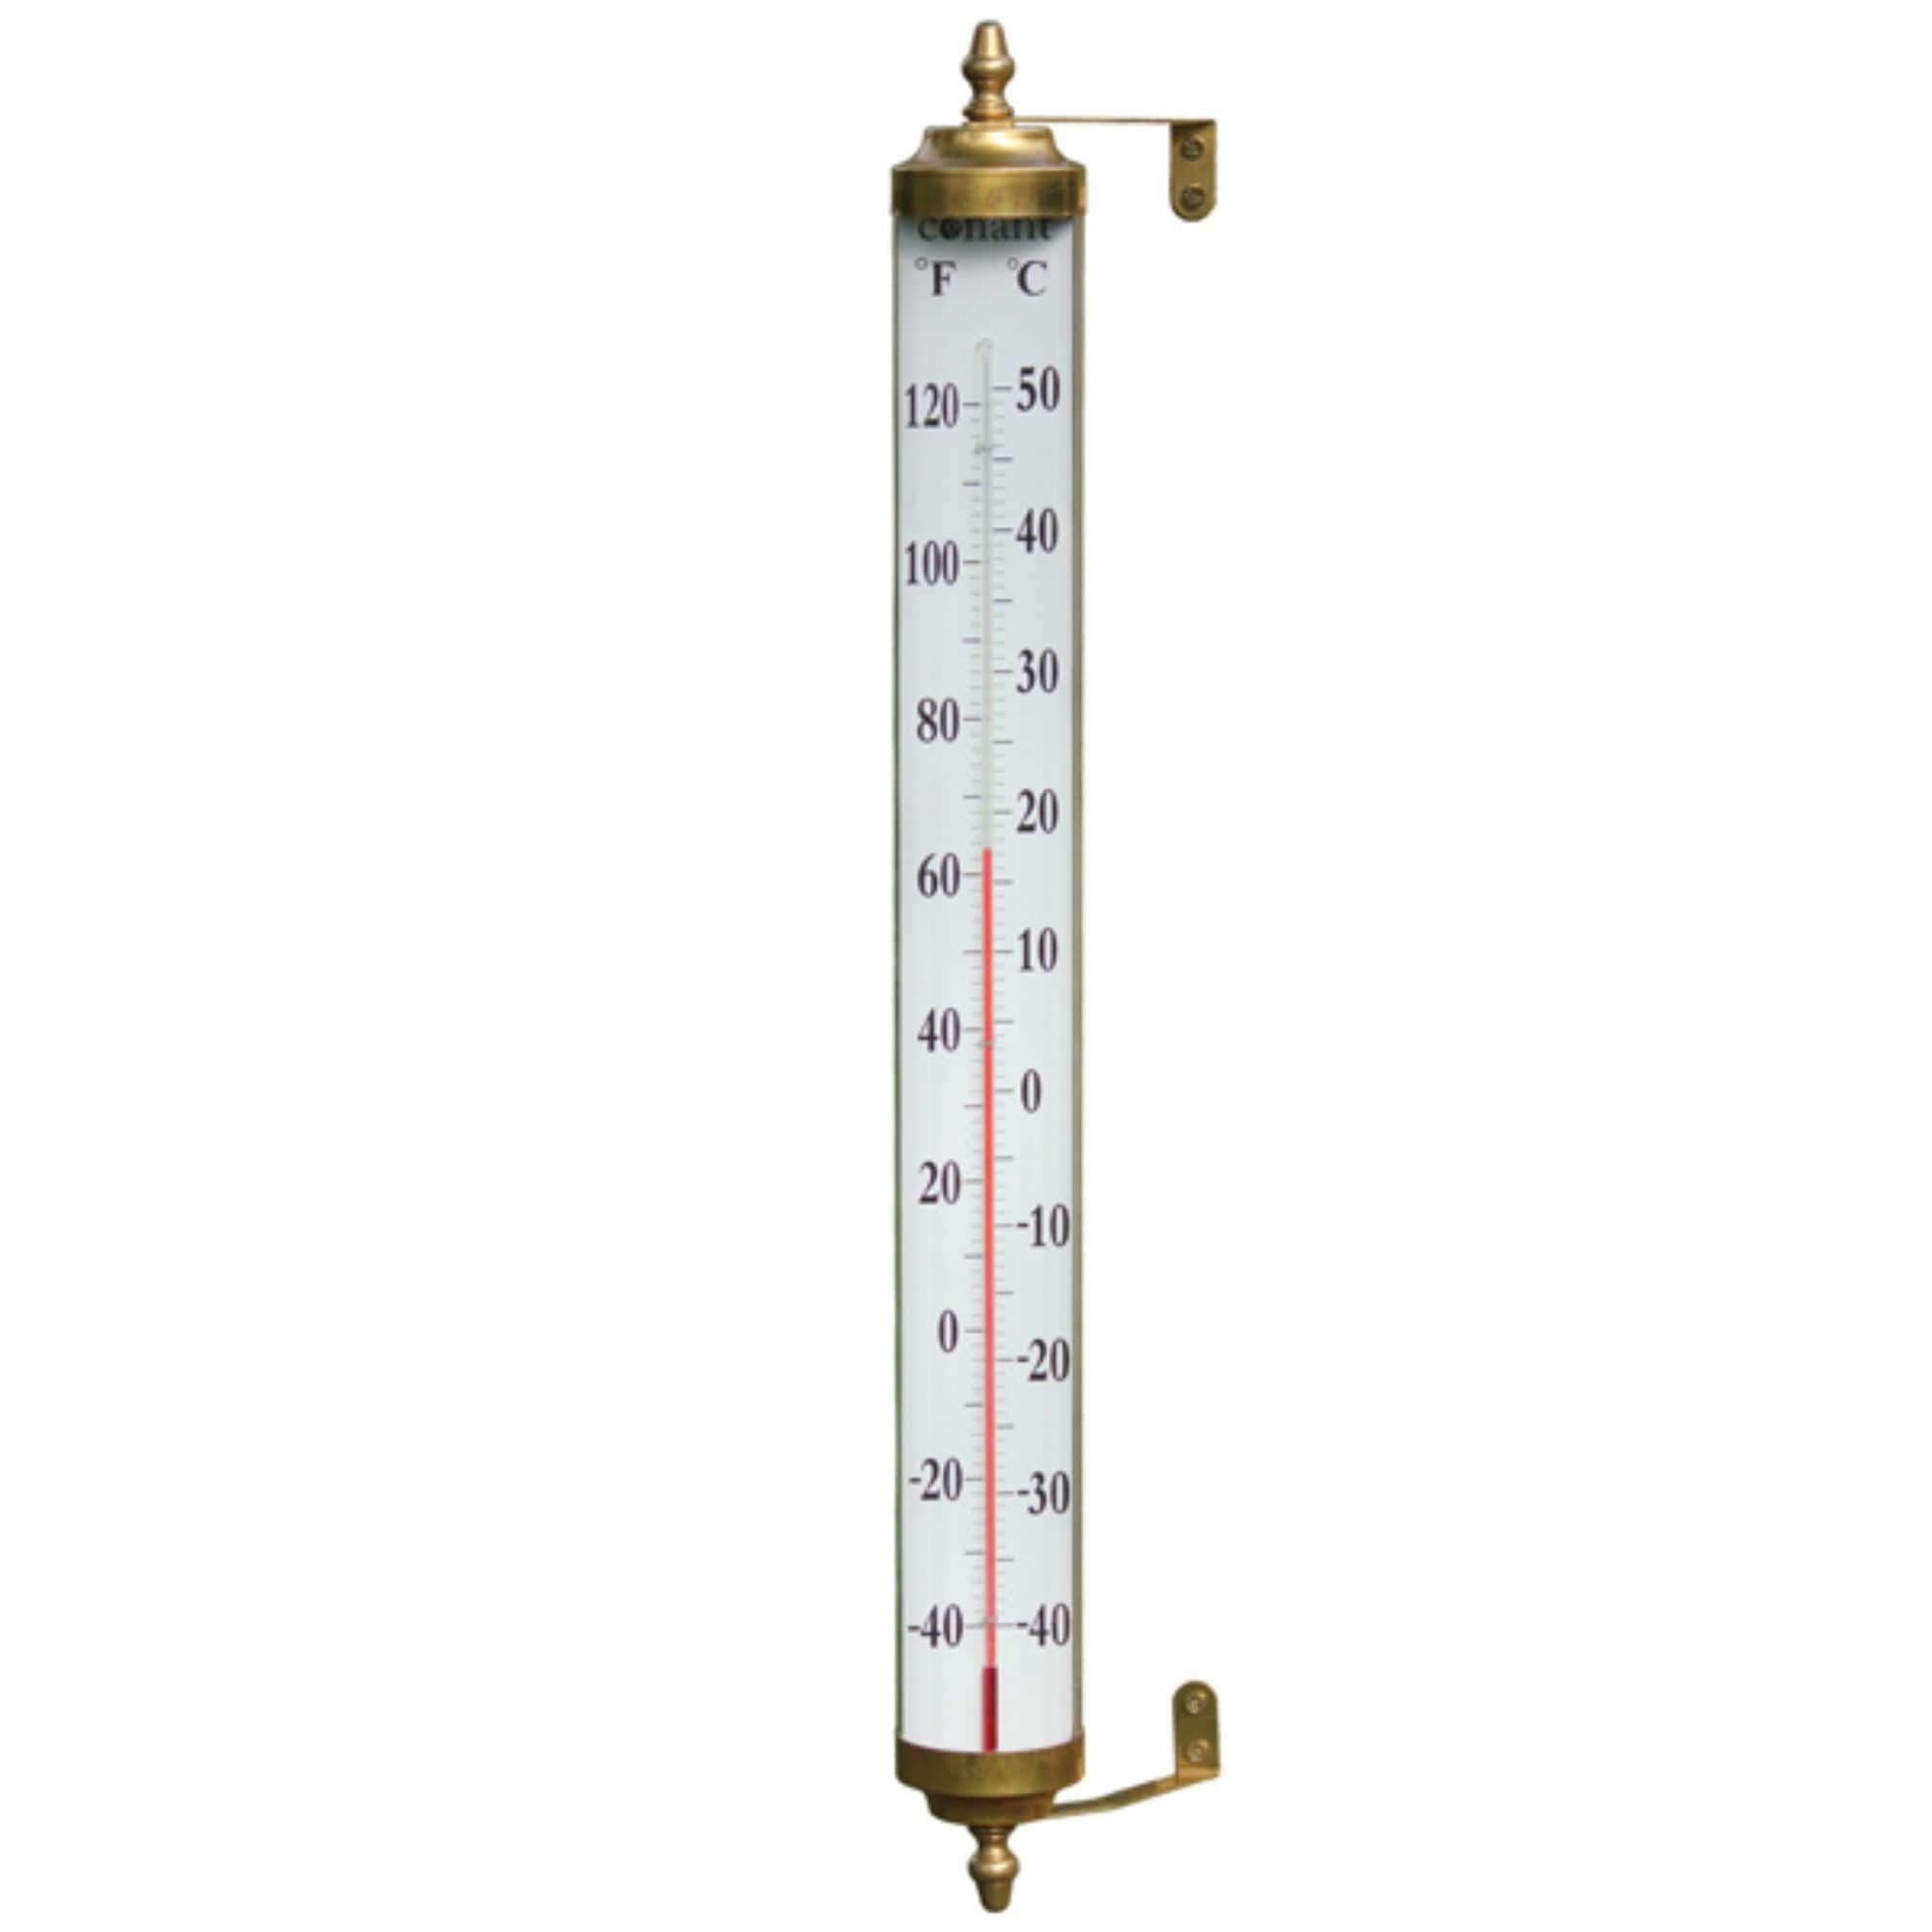 https://ak1.ostkcdn.com/images/products/is/images/direct/056cd60b878dd4f712d6ce756eeca0546fdd3090/4%22-Gold-and-White-Glass-Tube-Window-Thermometer.jpg